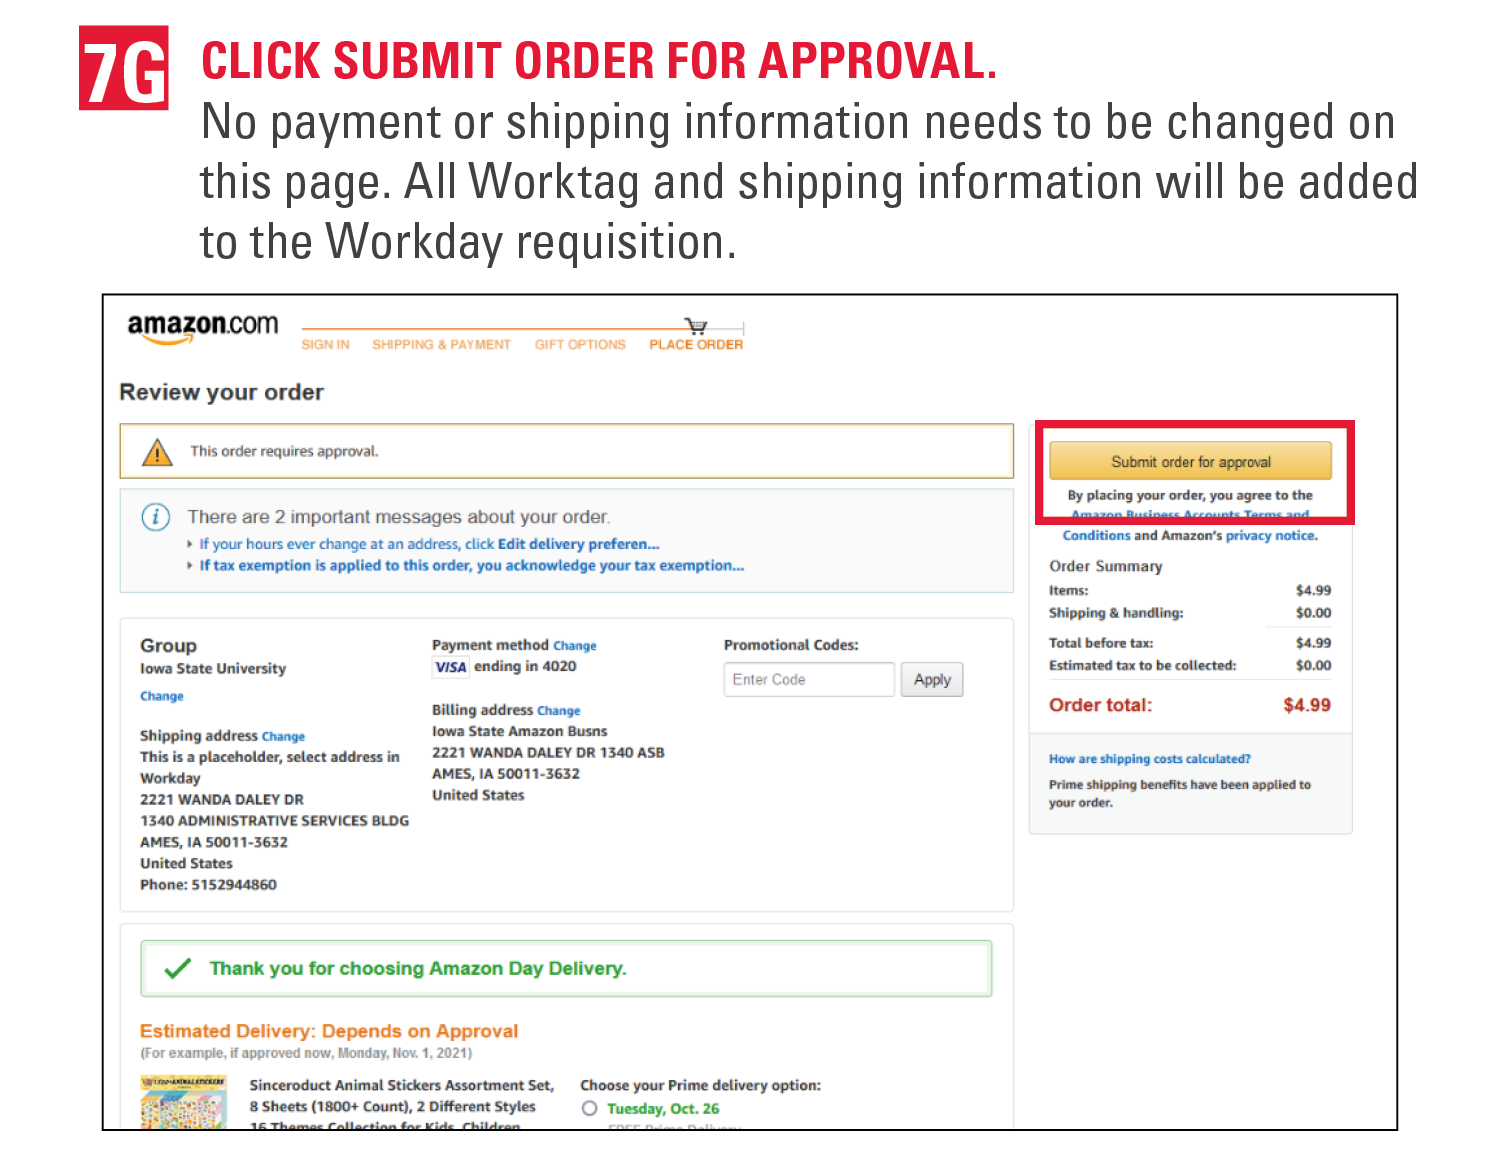 7g. Click submit order for approval. No payment or shipping information needs to be changed on this page. All Worktag and shipping information will be added to the Workday requisition.